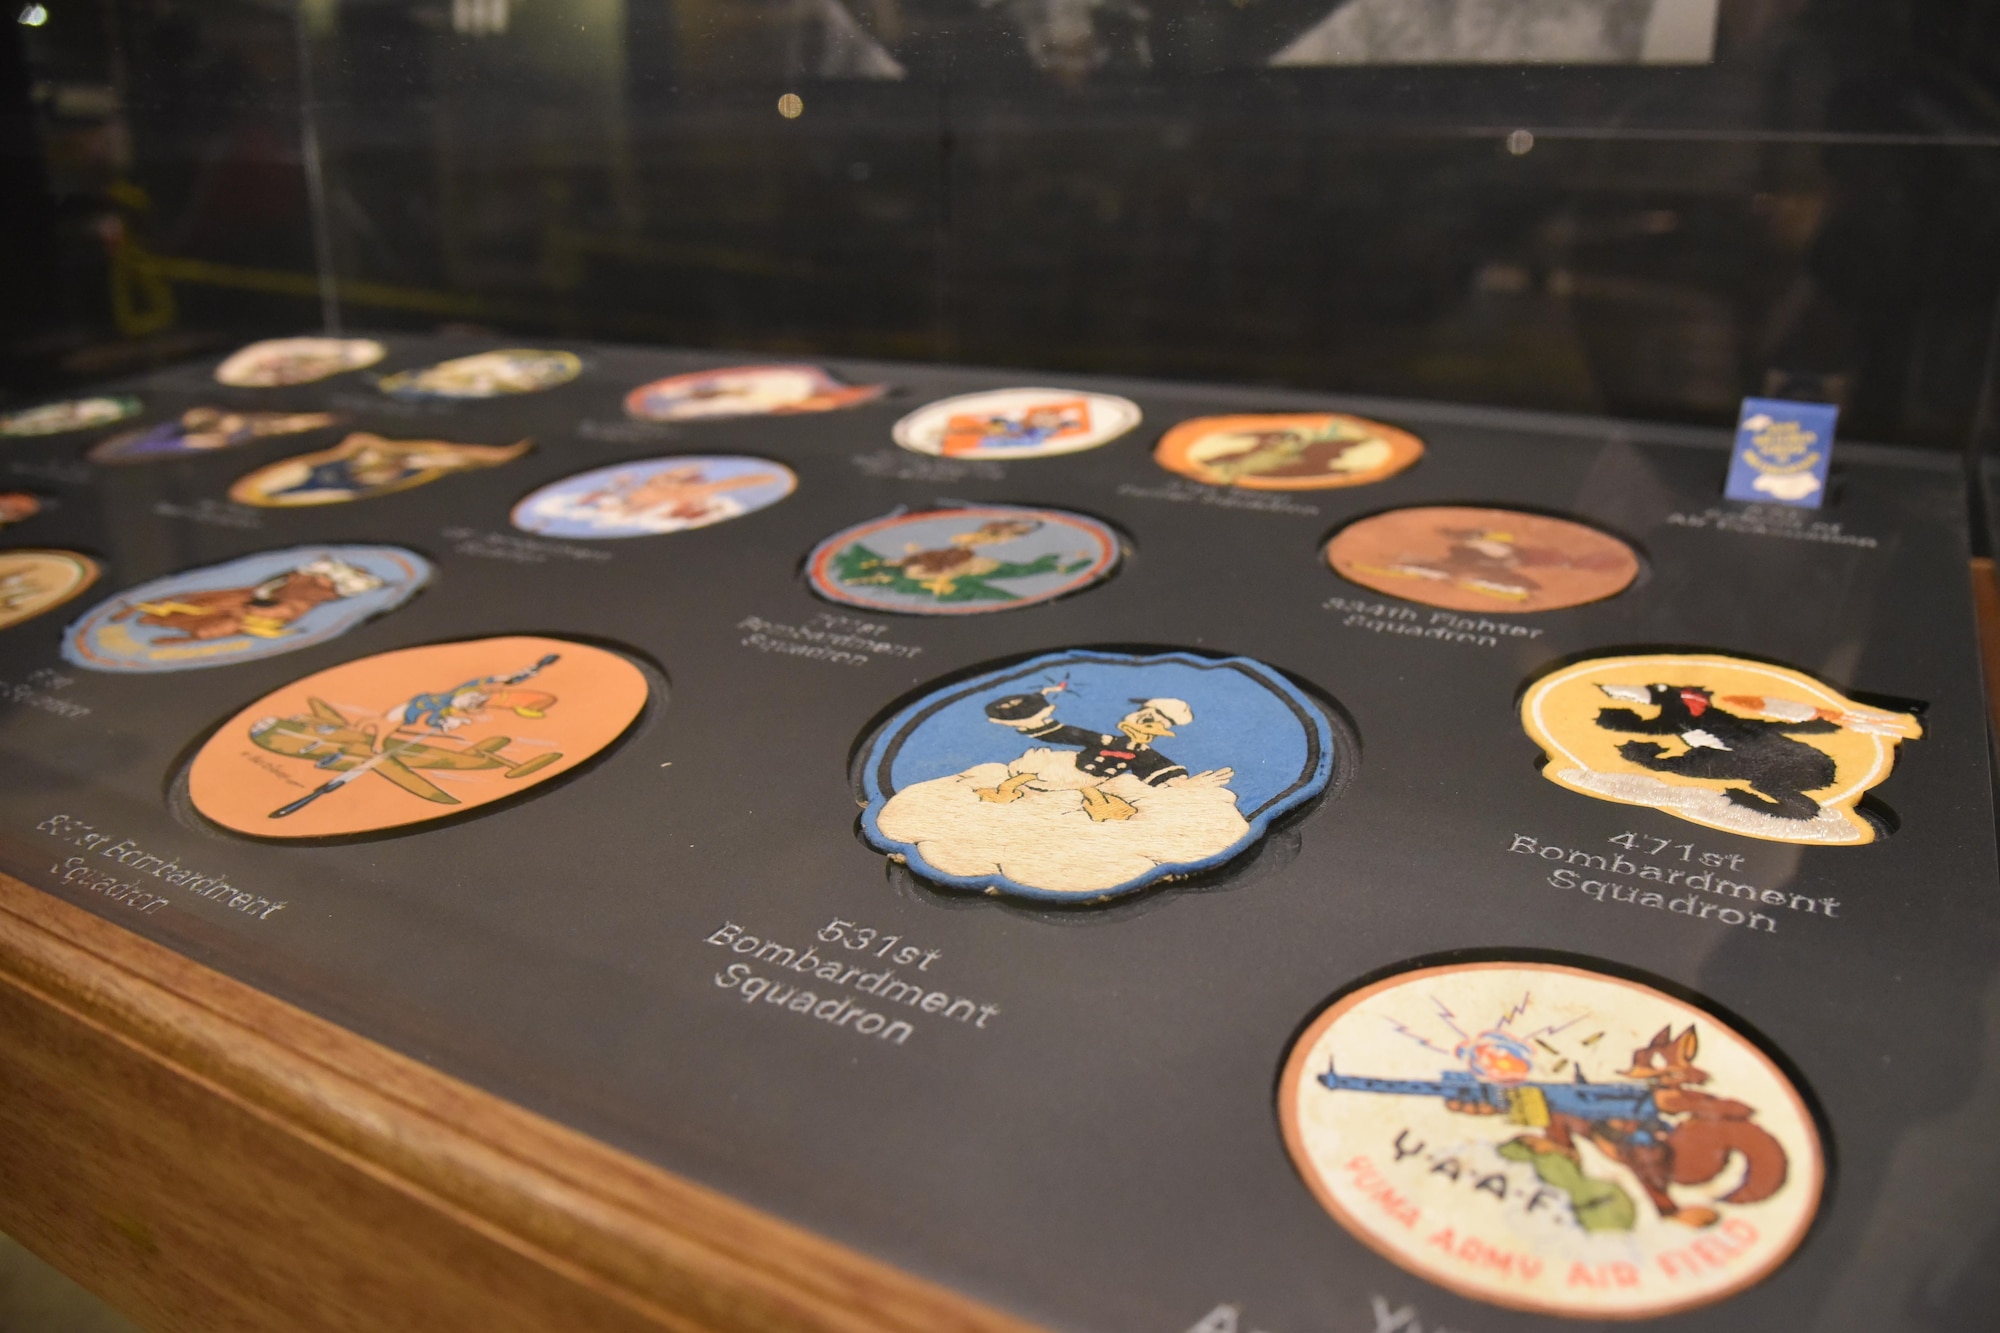 DAYTON, Ohio - The Disney Pins on Wings exhibit in the World War II Gallery at the National Museum of the U.S. Air Force. (U.S. Air Force photo)